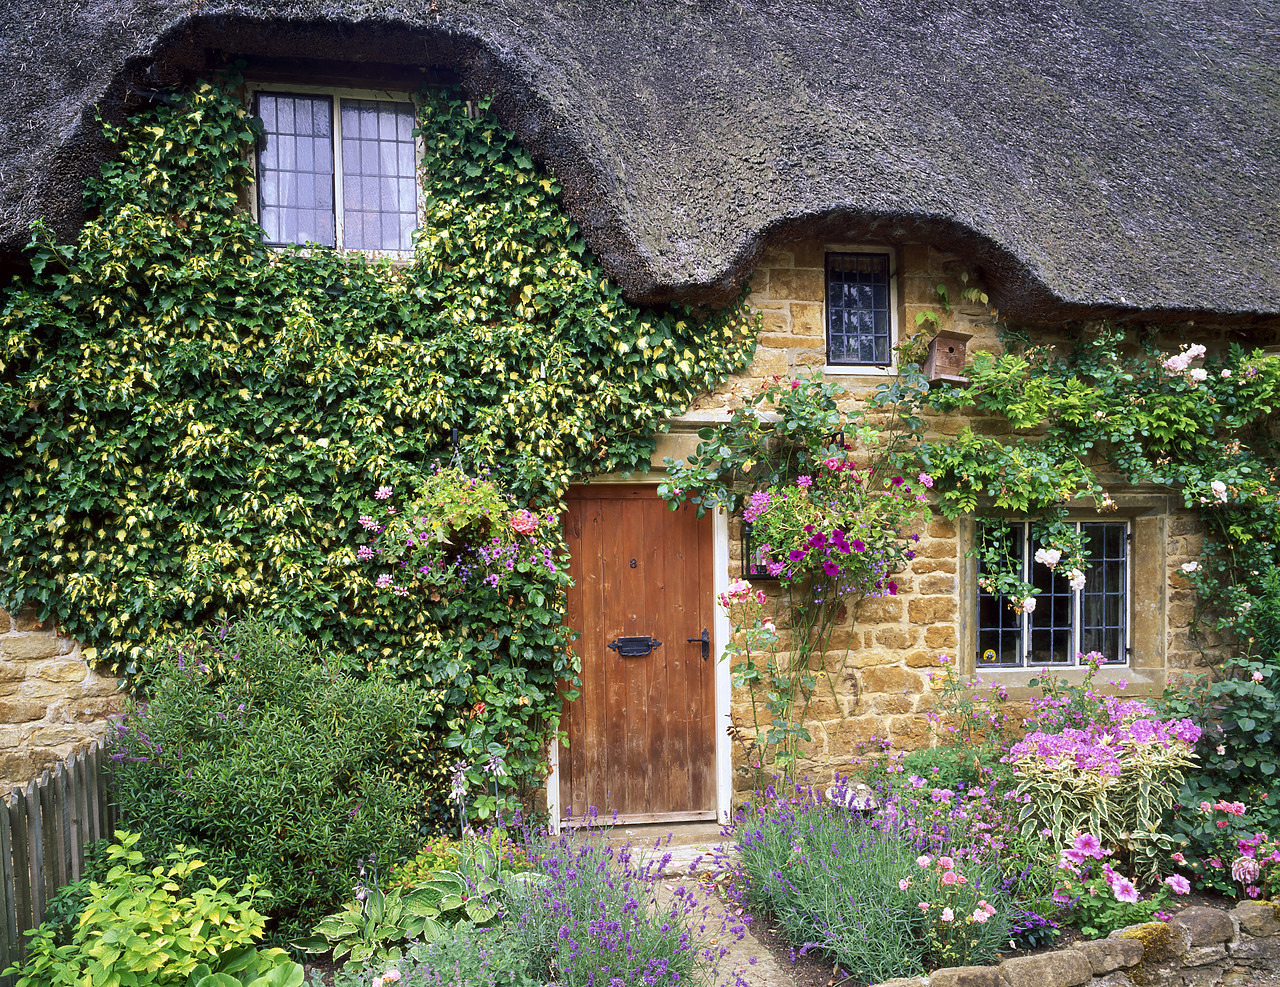 #200604-2 - Thatched Cottage & Garden, Great Tew, Oxfordshire, England